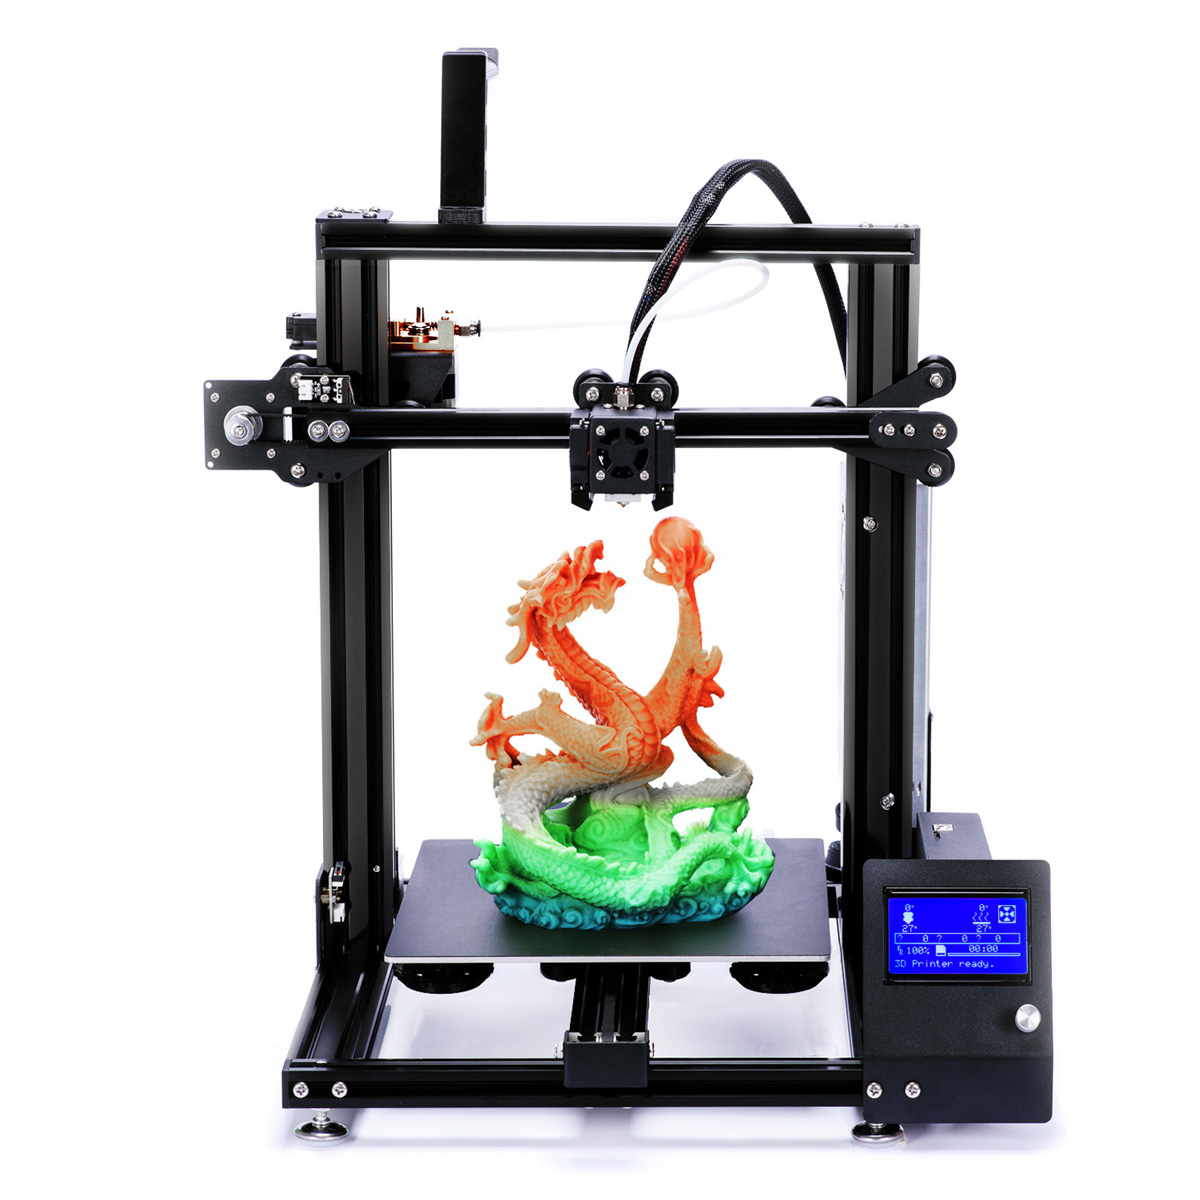 ADIMLab Gantry-S 3D Printer DIY Kit 230*230*260mm Printing Size Support Power Resume/Filament Run-out Detector w/ Metal Extruder & 3 Fans for V6 T 8